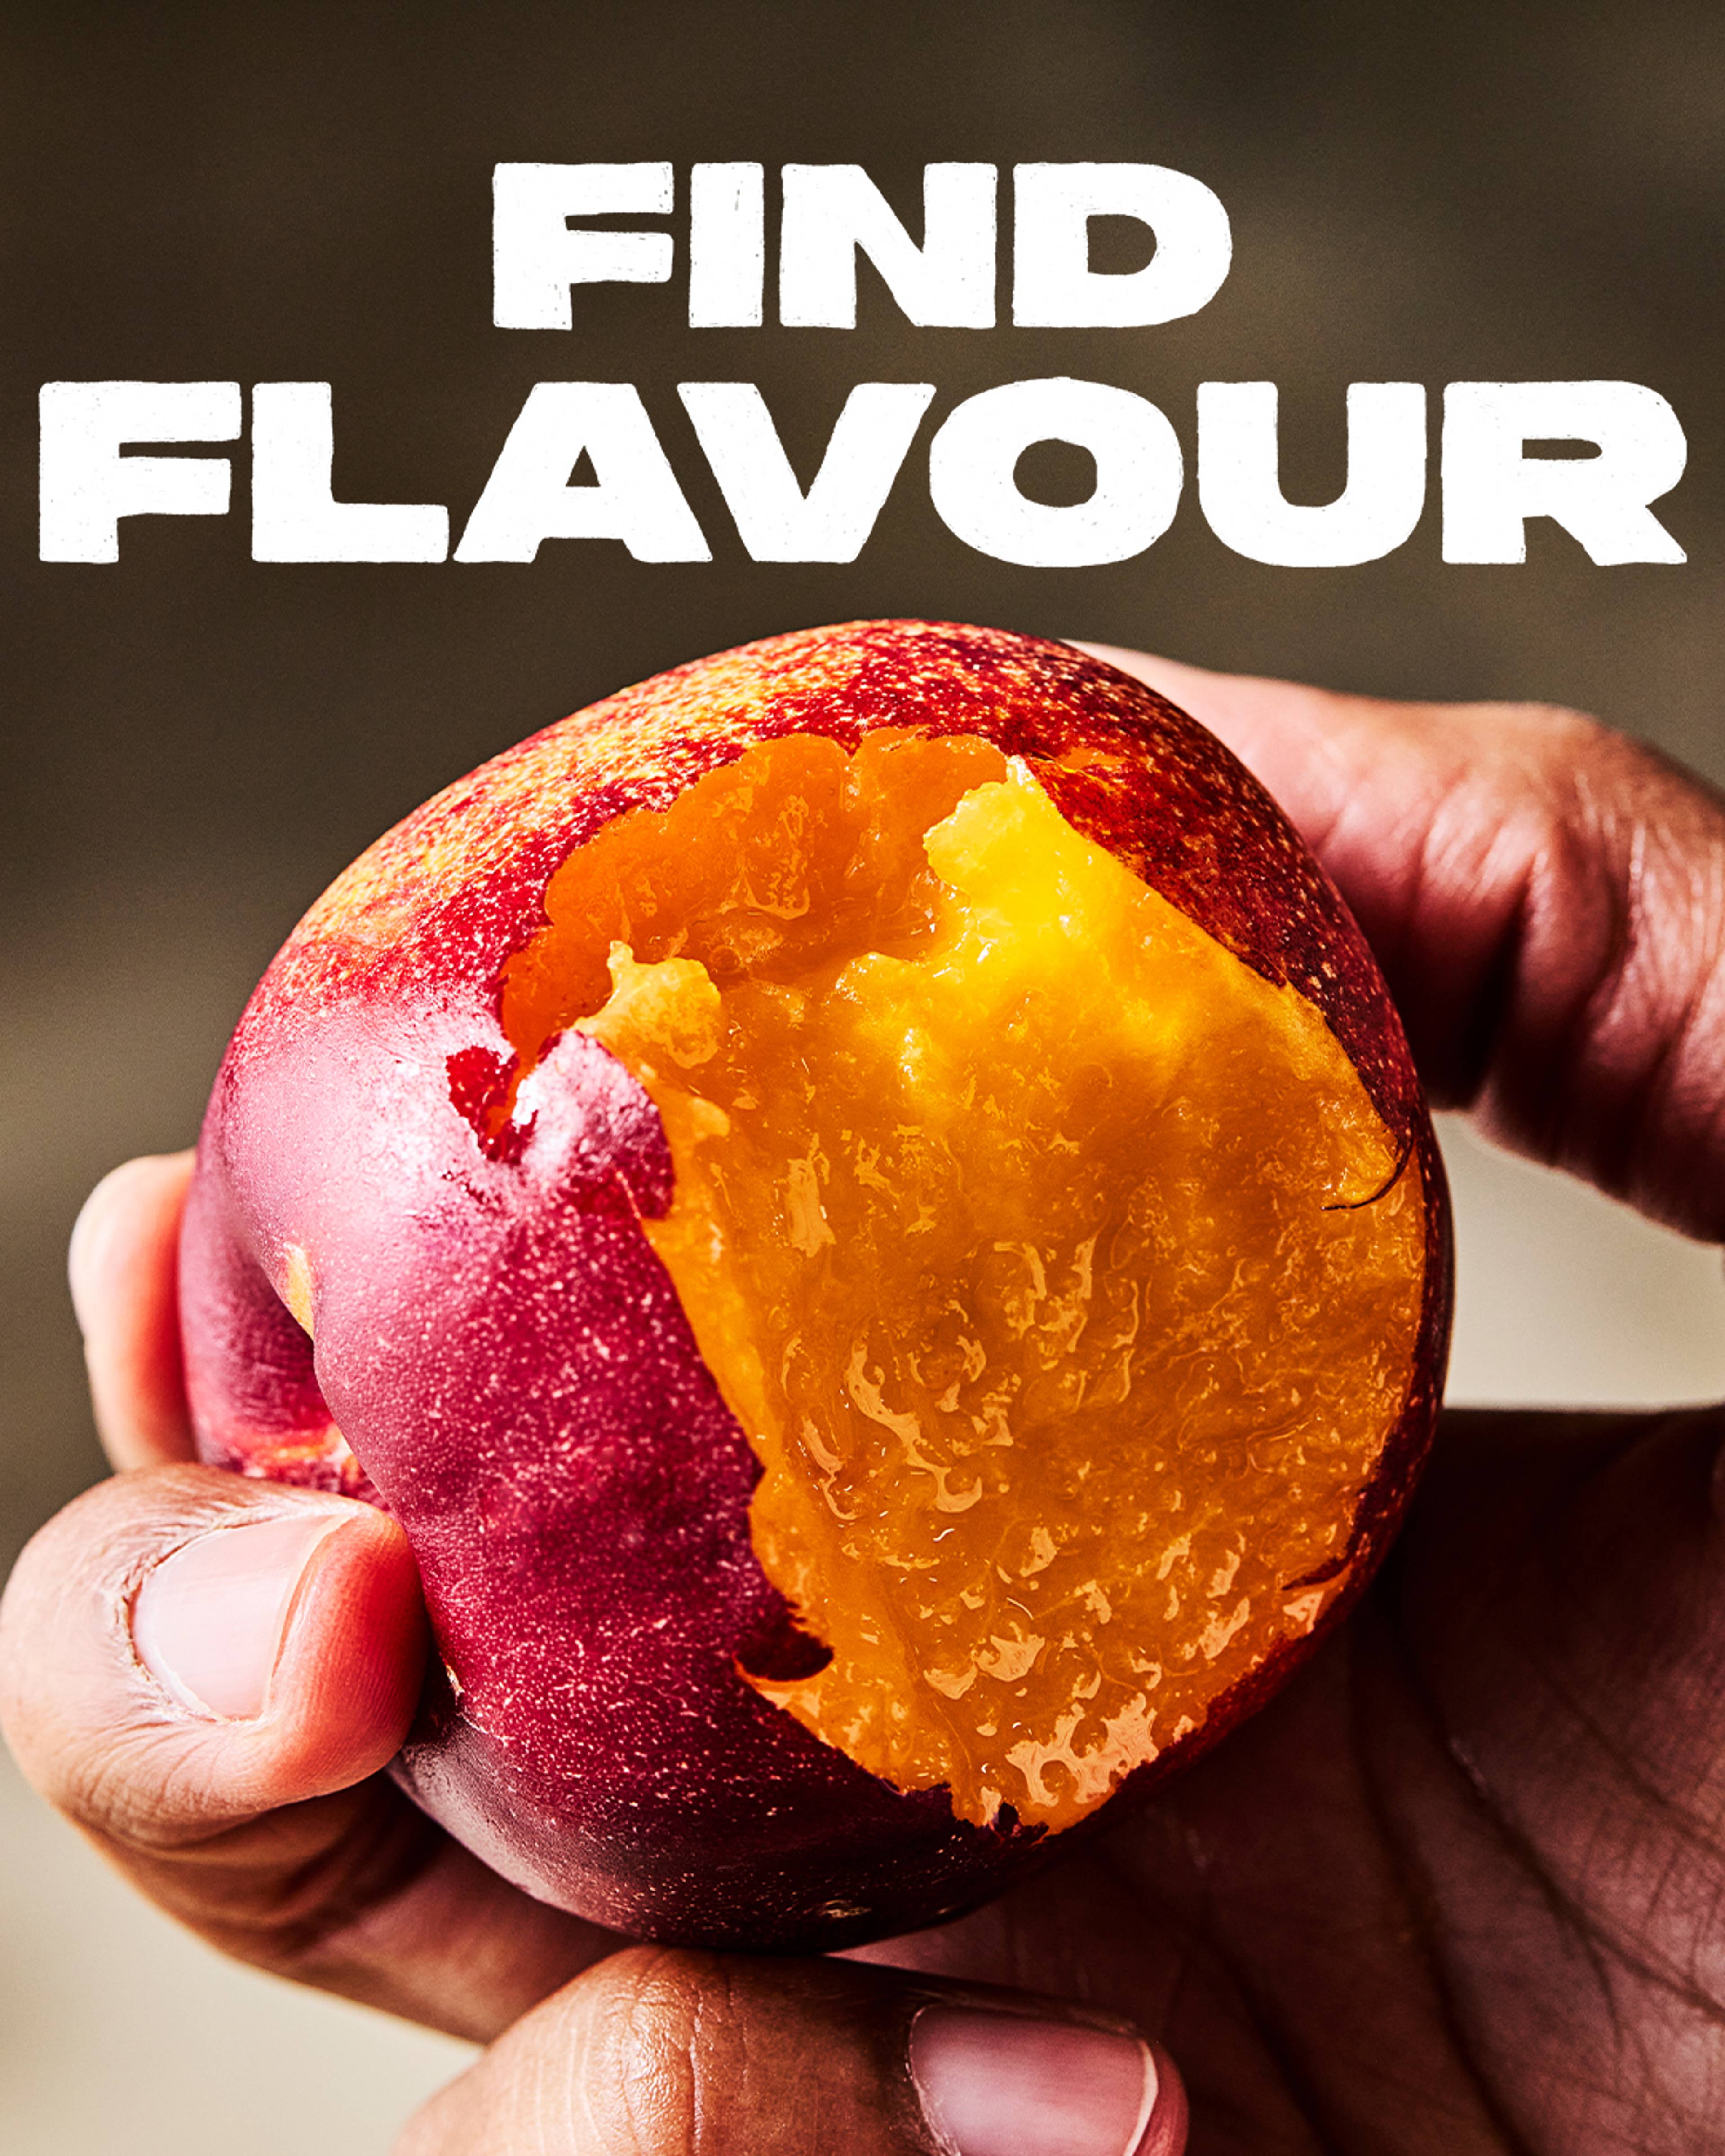 nectarine with a bite taken out of it with copy overlay 'find flavour'